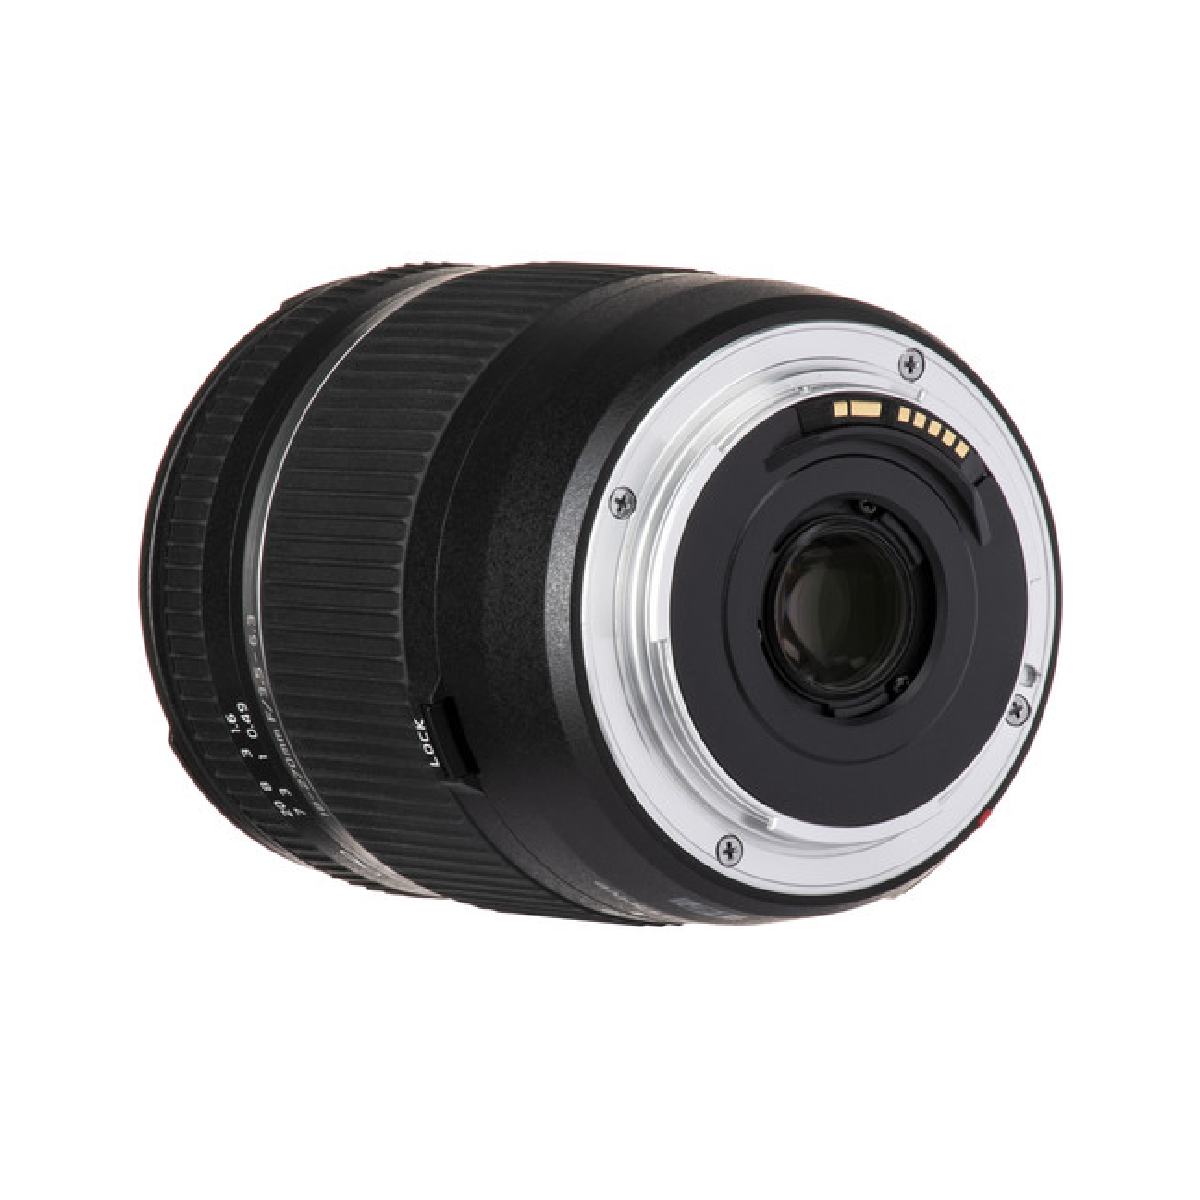 TAMRON 18-270MM F/3.5-6.3 DI II VC PZD LENS FOR CANON EF » HpCamStore